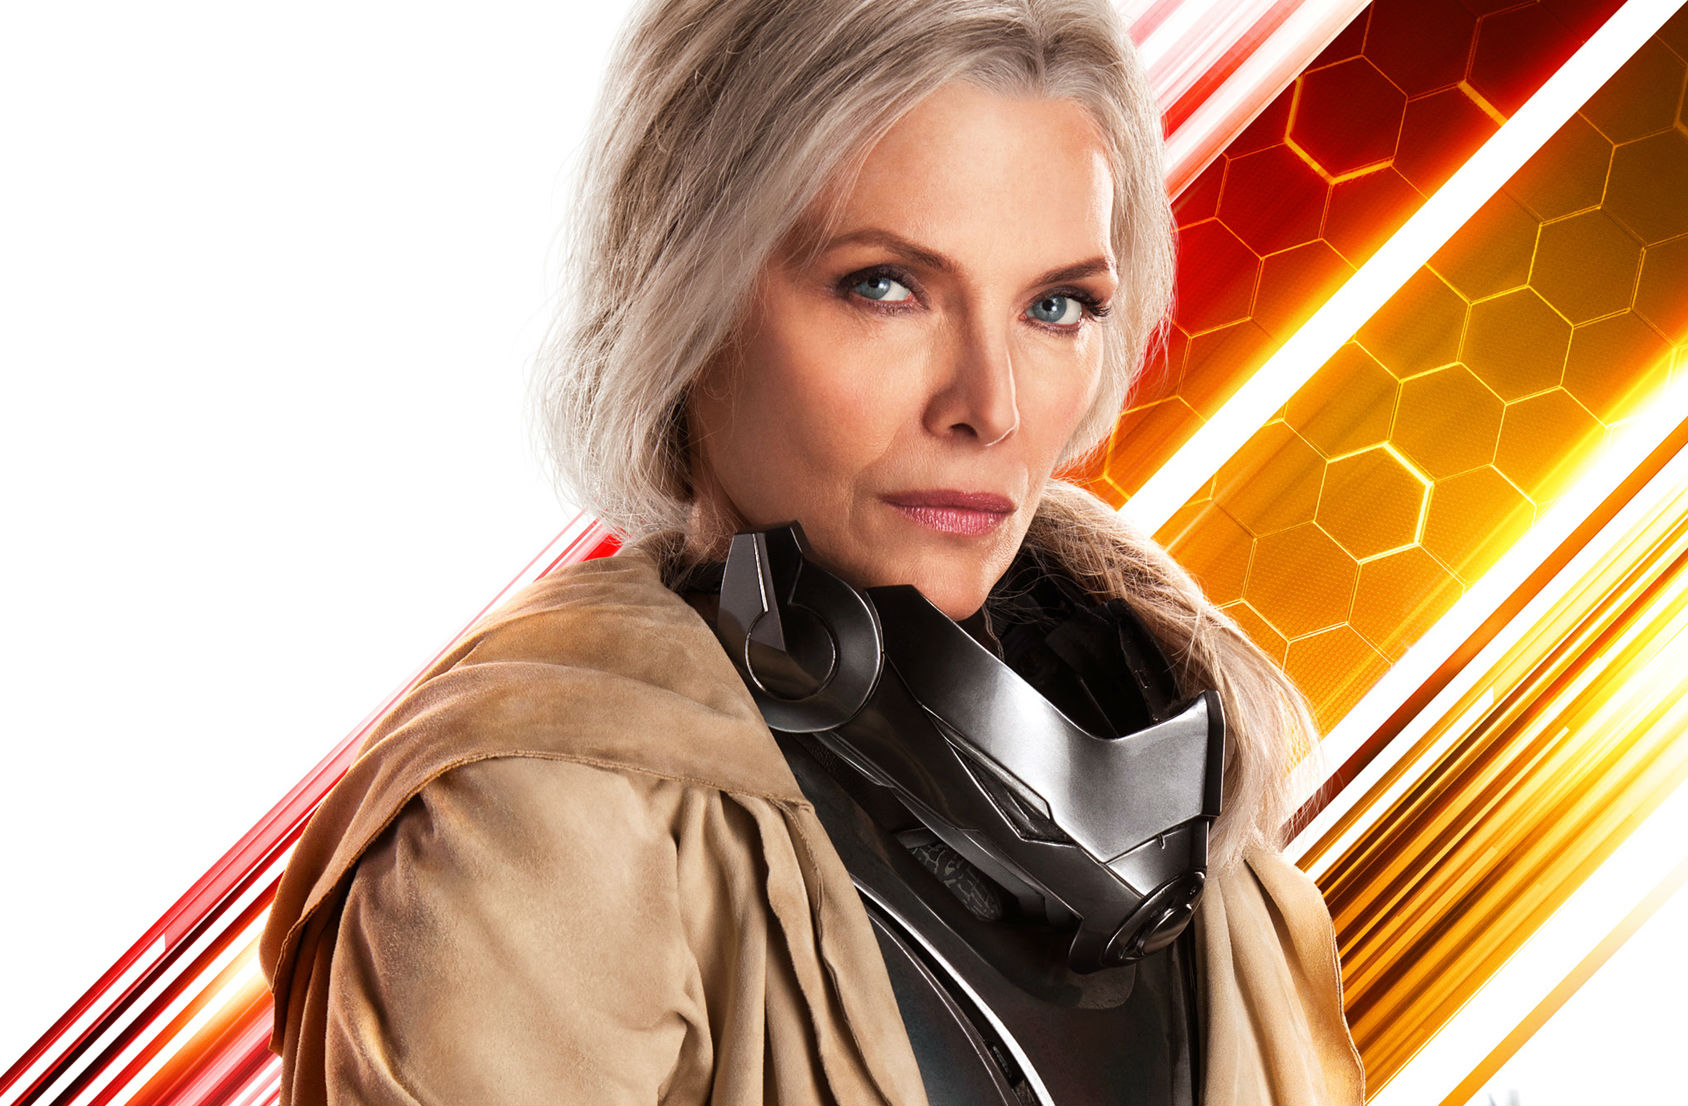 Ant-Man And The Wasp’s Generational Superhero Story Adds A New Layer To The MCU